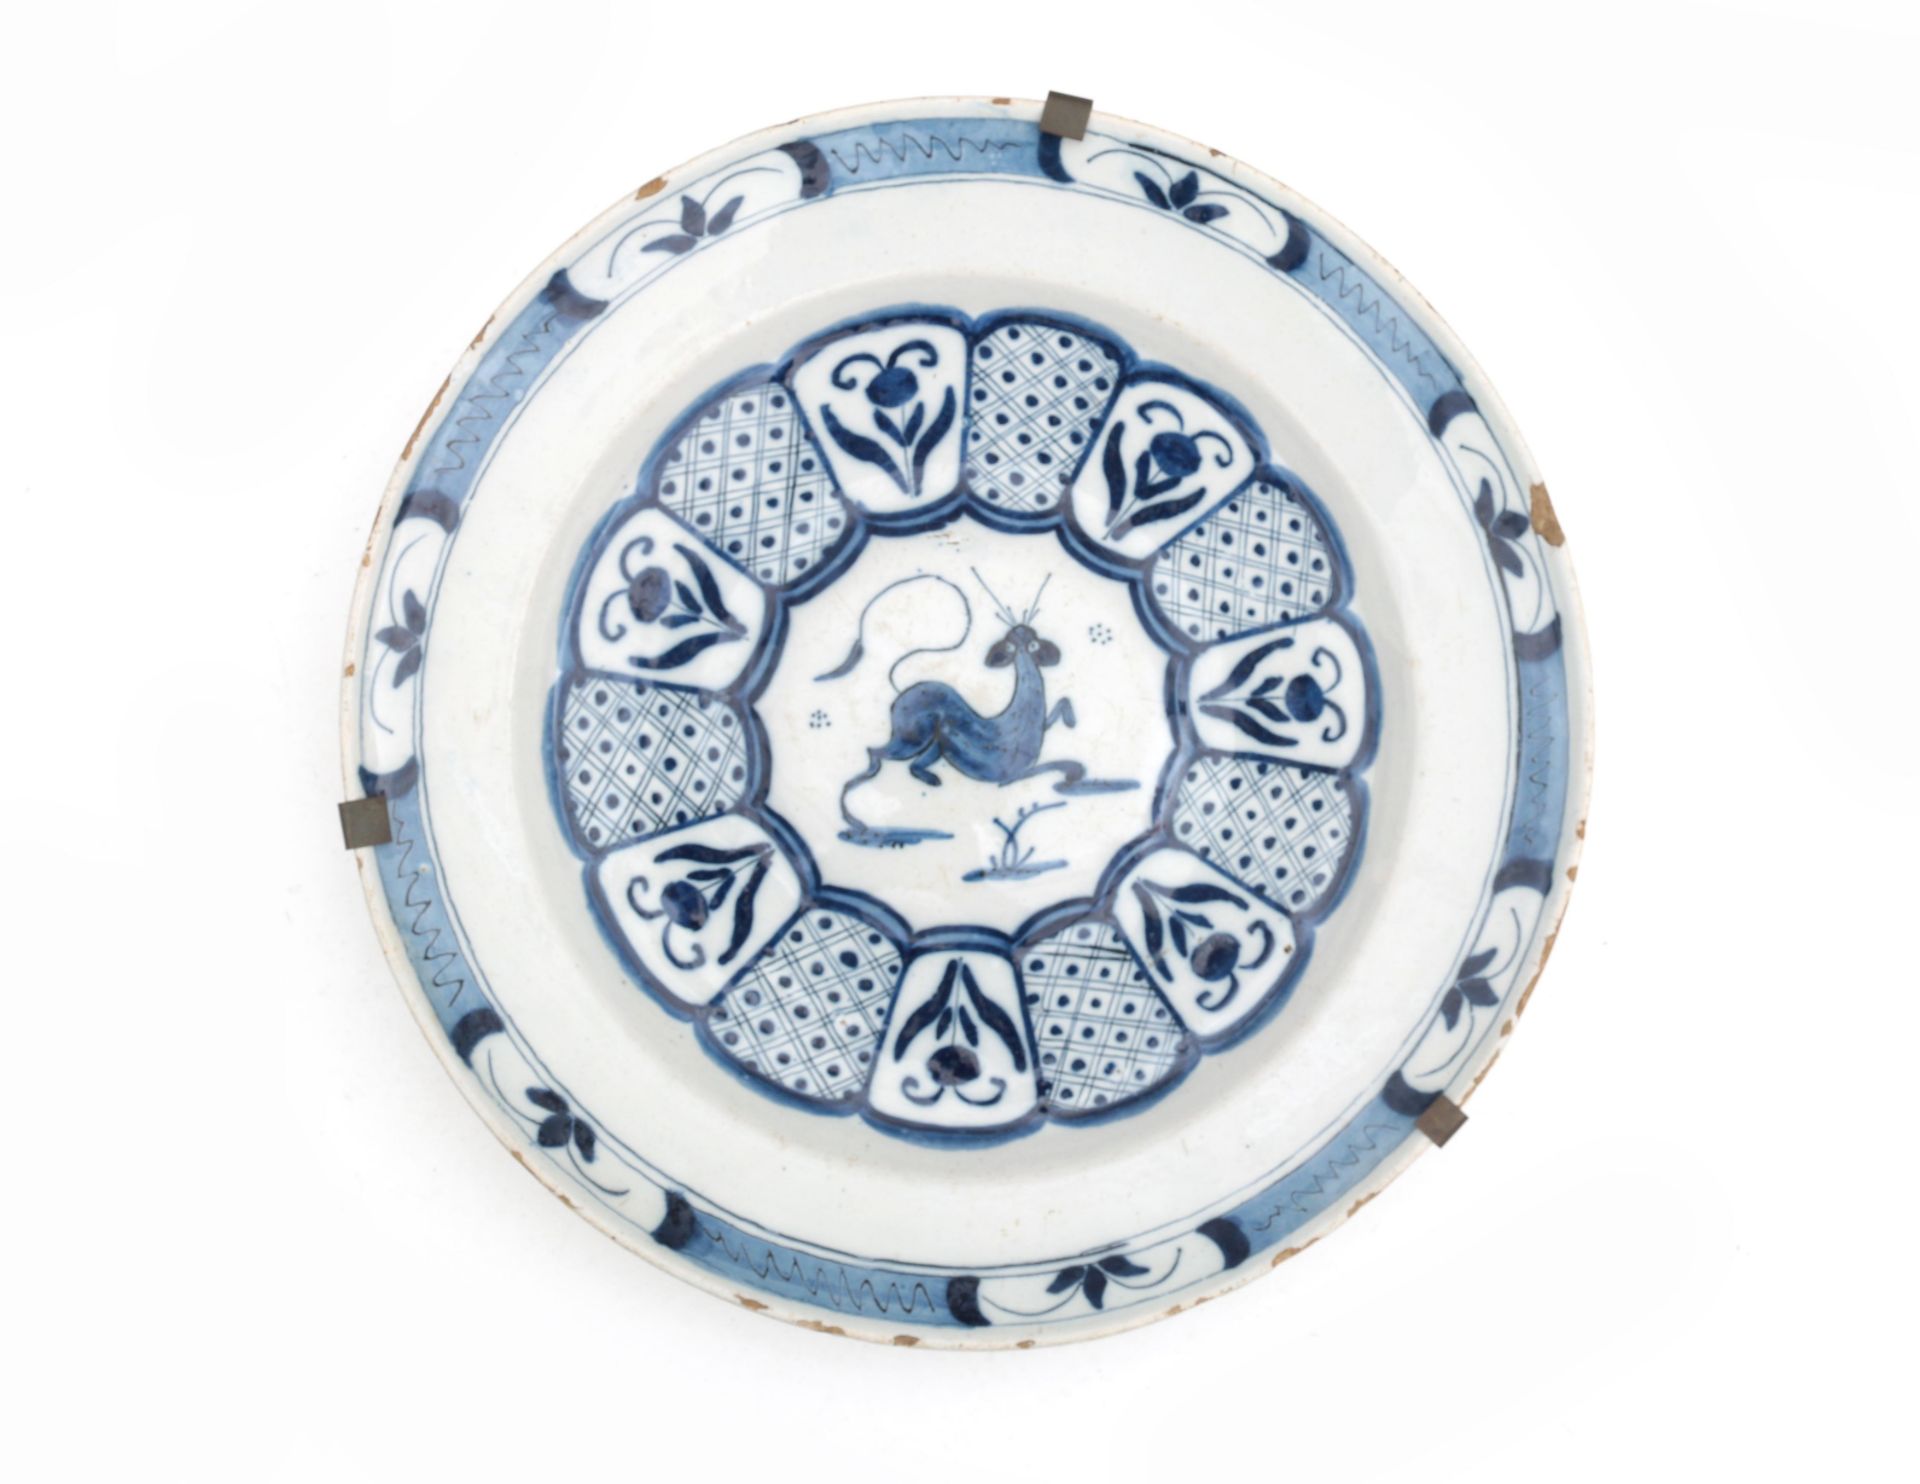 A large blue and white earthenware dish, decorated with flowers and a fantasy animal, probably